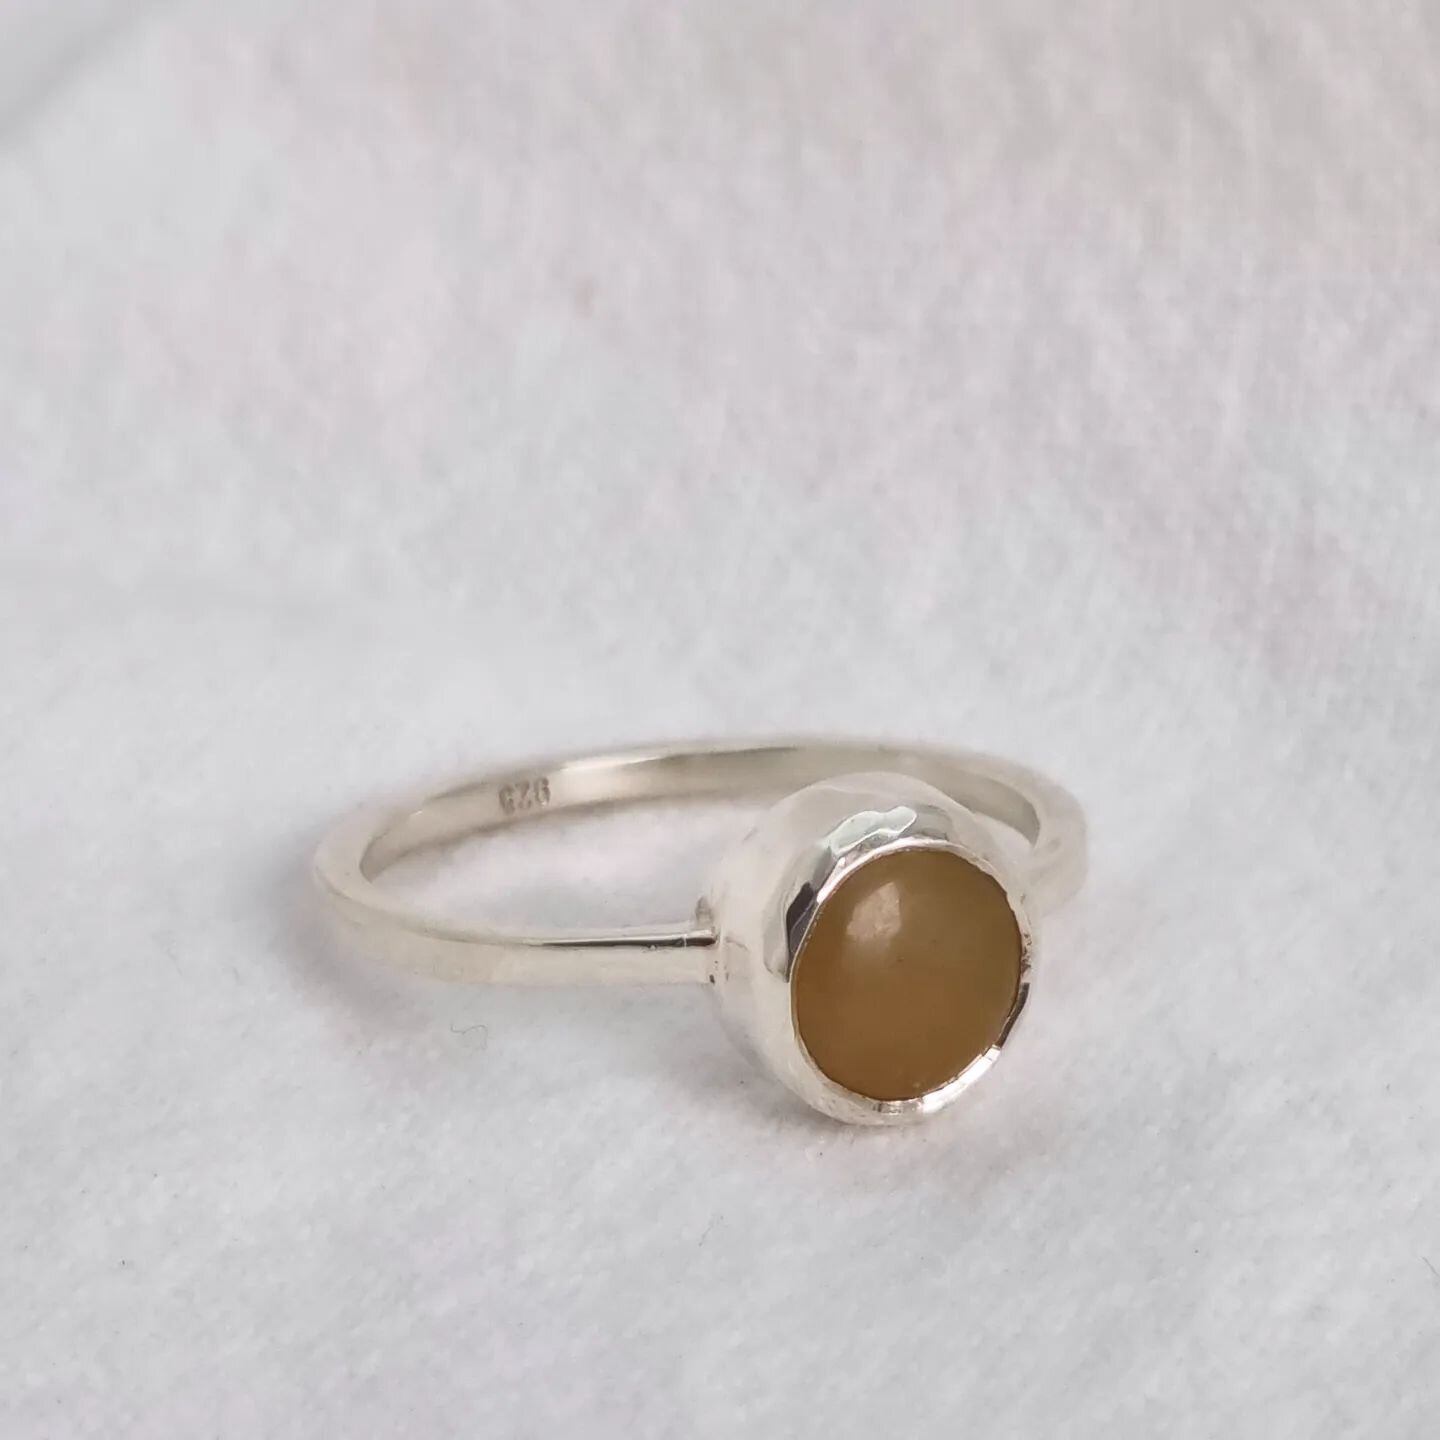 Pebble no. 98 from the One Mile Collection. Simple ans sophisticated ring featuring a hand cut pebble set in sterling silver.
Size P

#ring #pebblering #onemilecollection #jewellery #silverring #finejewellery #oneofakind